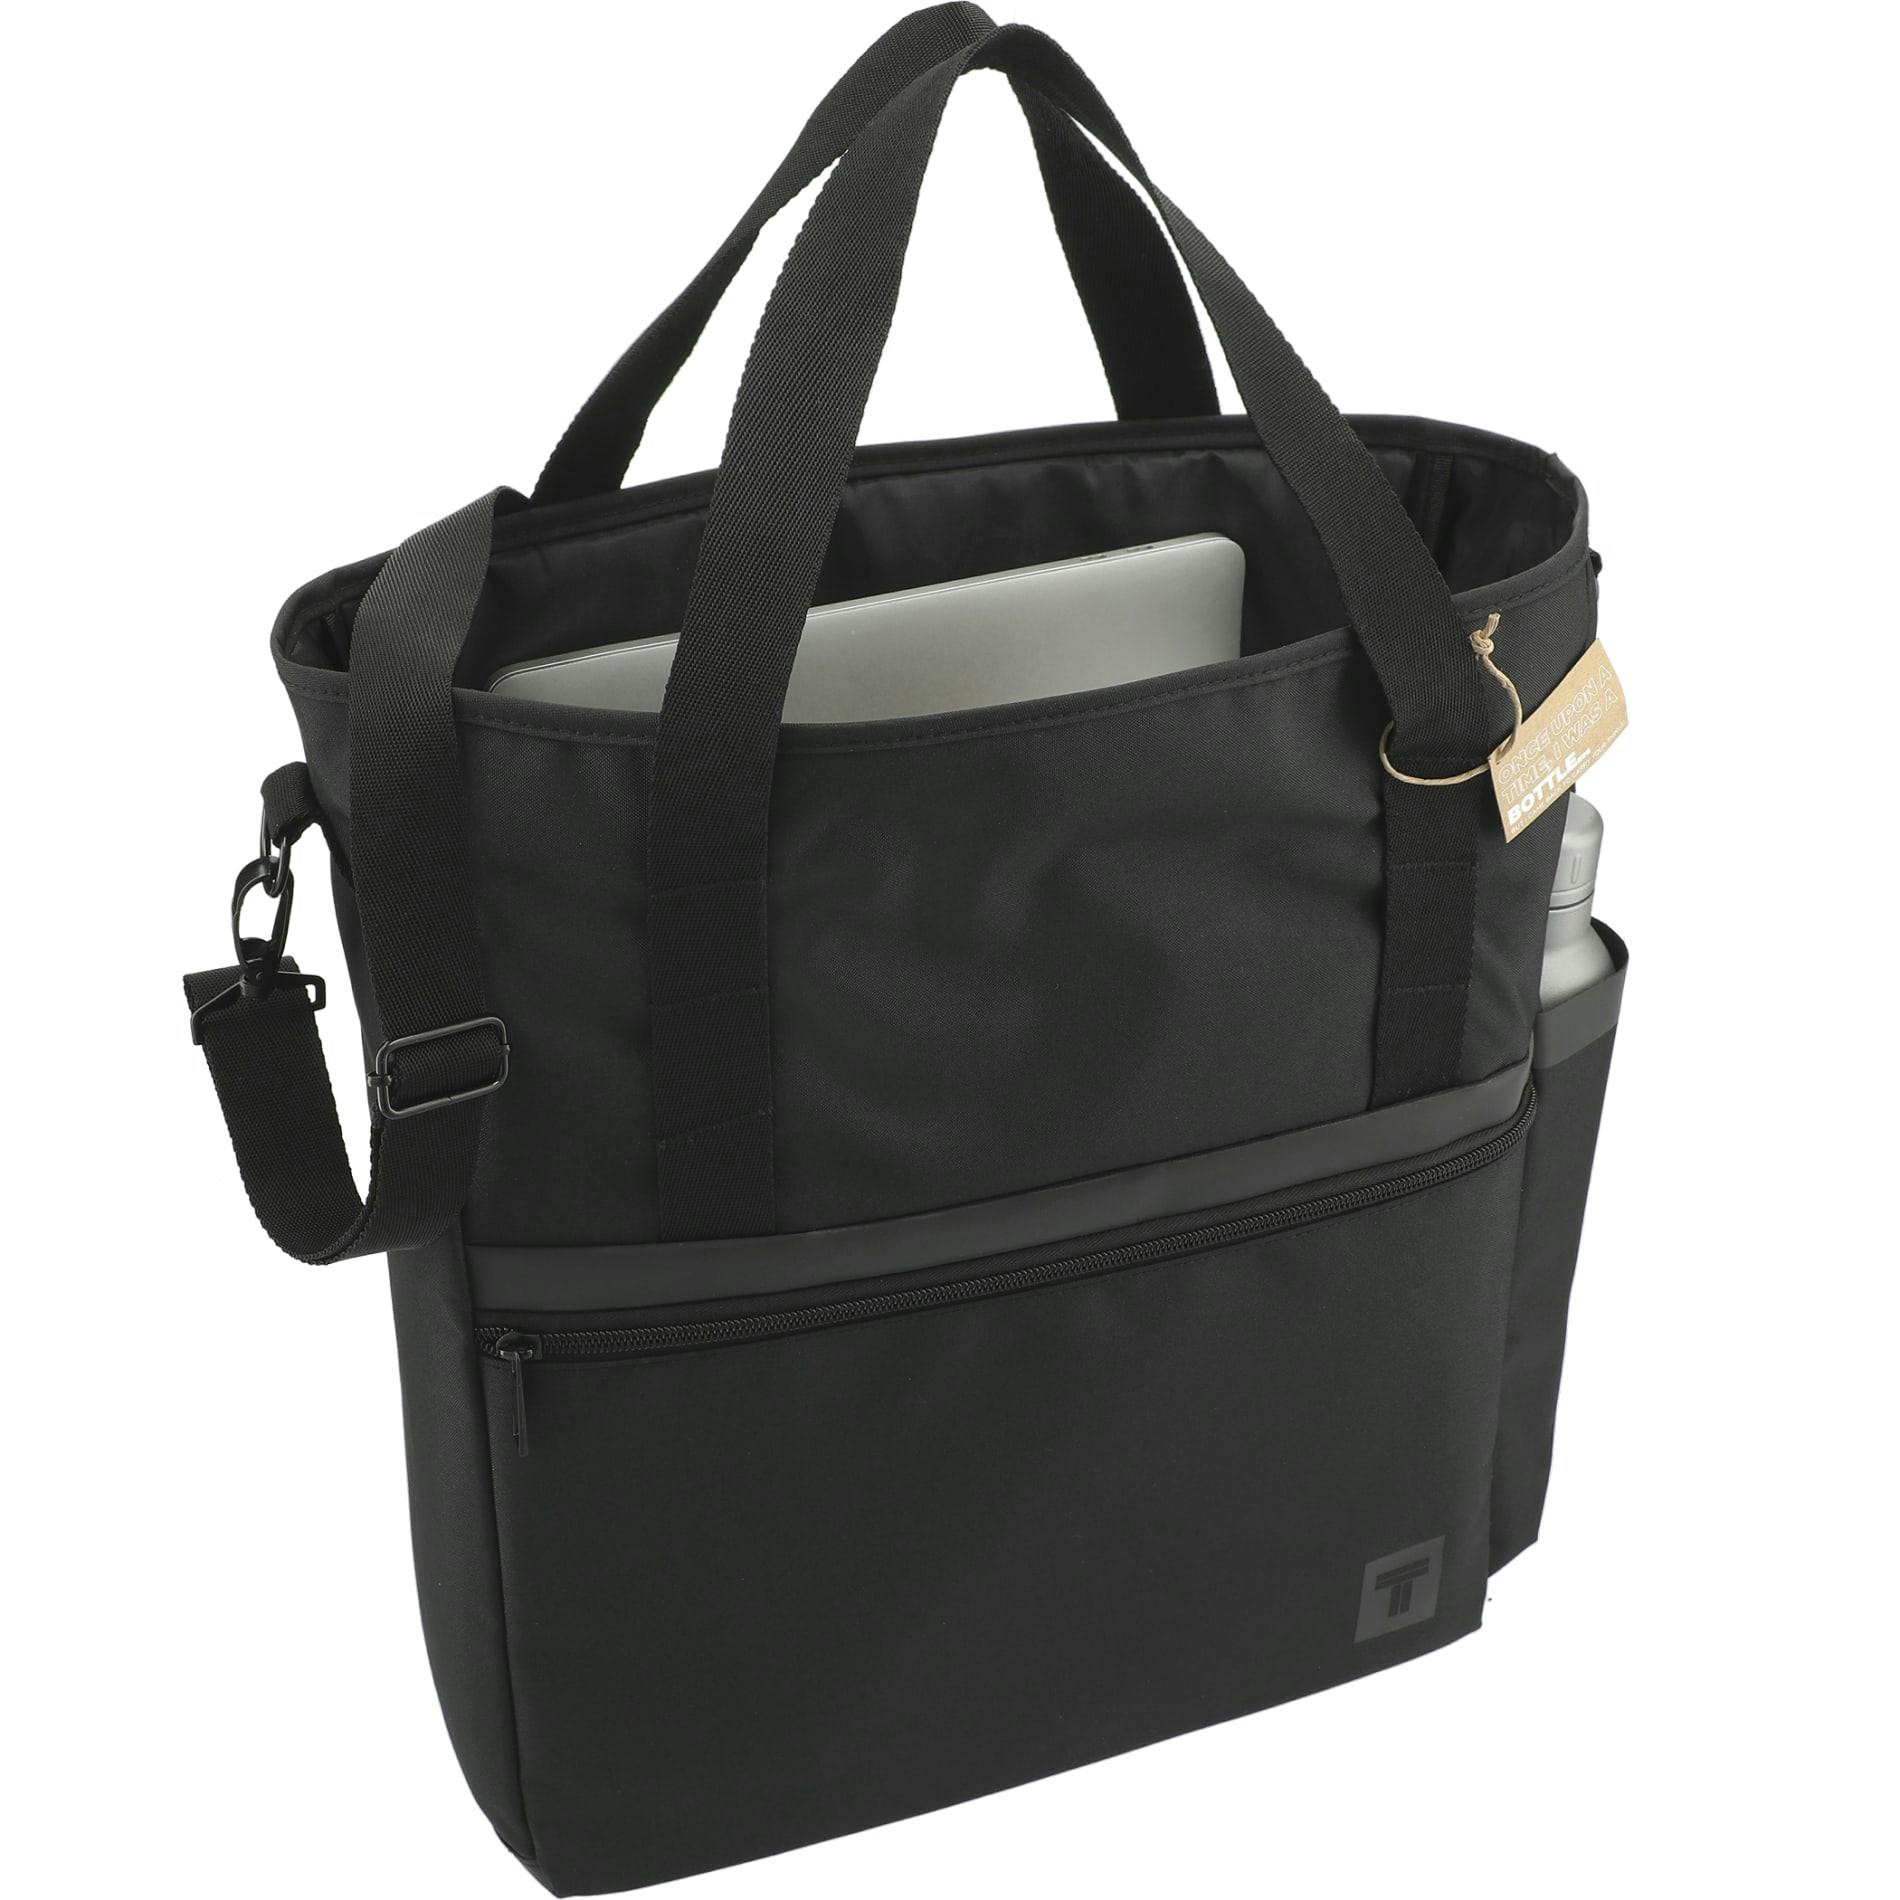 Tranzip Recycled Computer Tote - additional Image 1